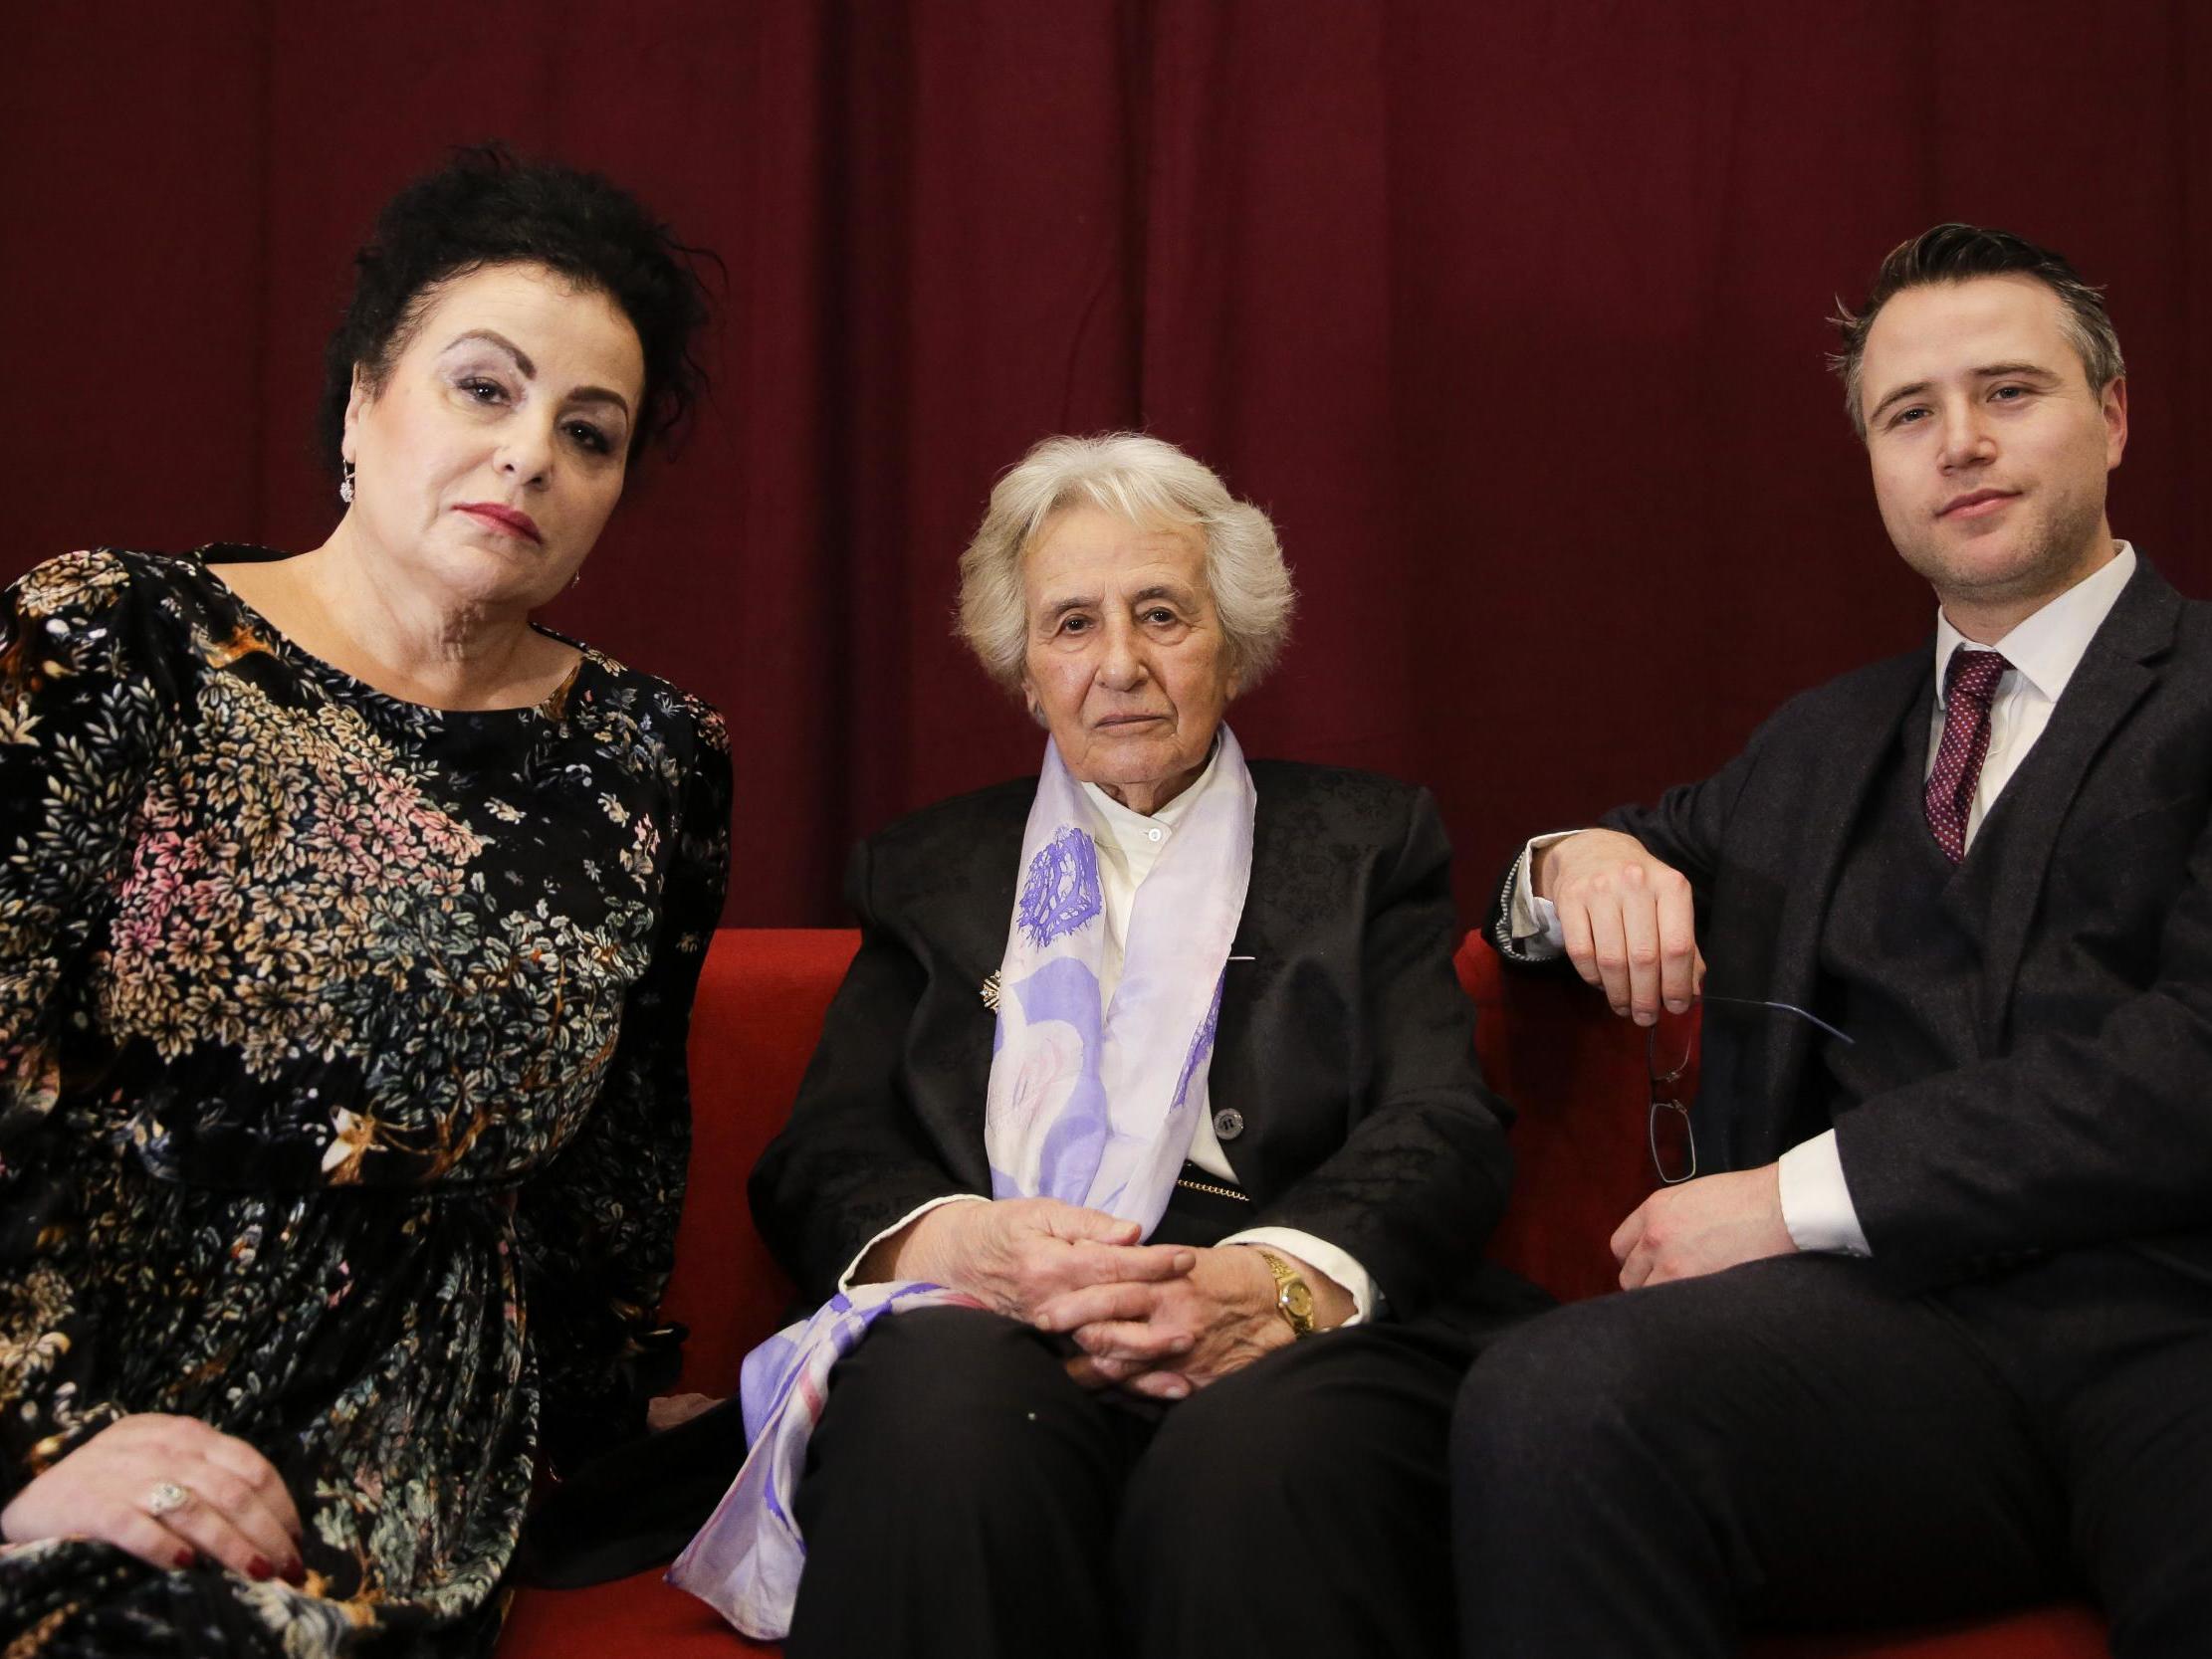 Holocaust survivor Anita Lasker-Wallfisch, centre, her daughter Maya Jacobs Lasker-Wallfisch, left, and her grandson Simon Wallfisch, right, pose for a photo after an interview with the Associated Press in Berlin, Germany, Sunday 27 January 2019.